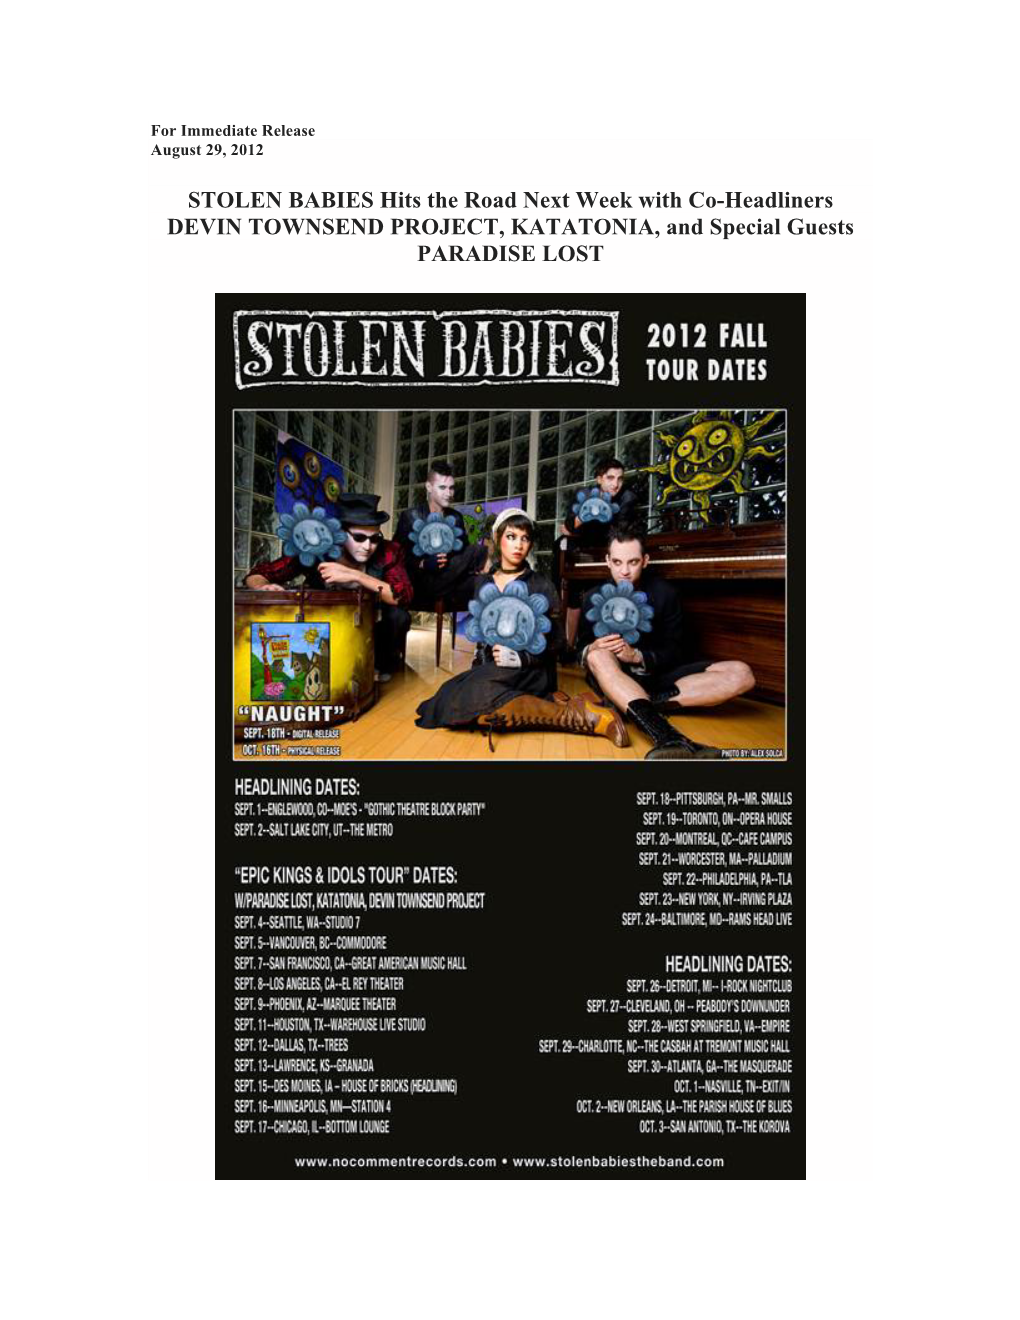 STOLEN BABIES Hits the Road Next Week with Co-Headliners DEVIN TOWNSEND PROJECT, KATATONIA, and Special Guests PARADISE LOST